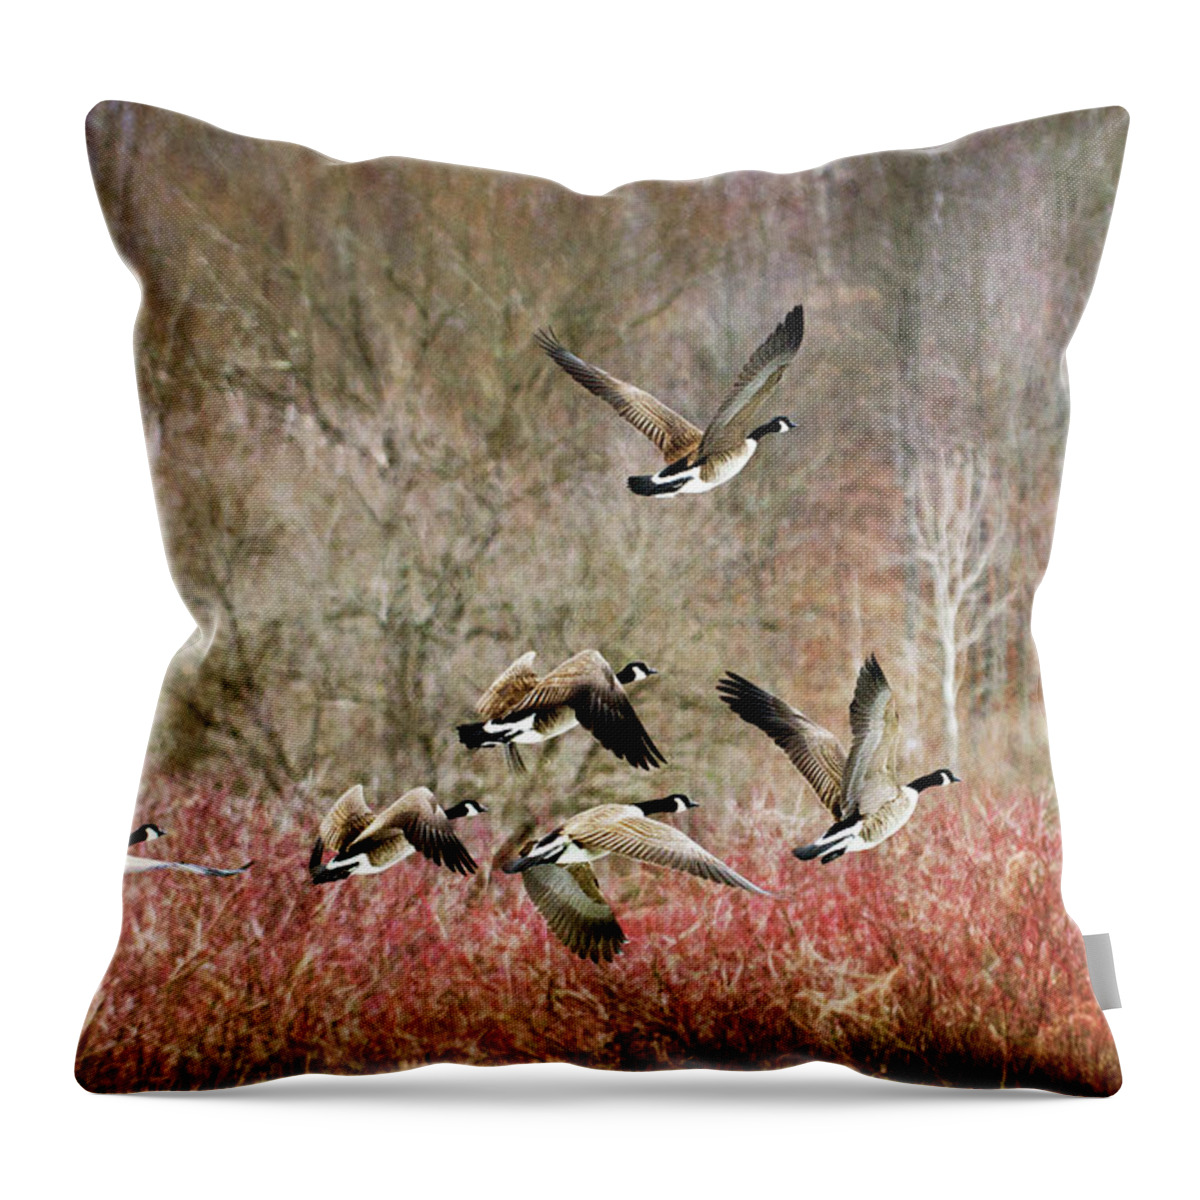 Canada Geese Throw Pillow featuring the photograph Canada Geese In Flight by Christina Rollo